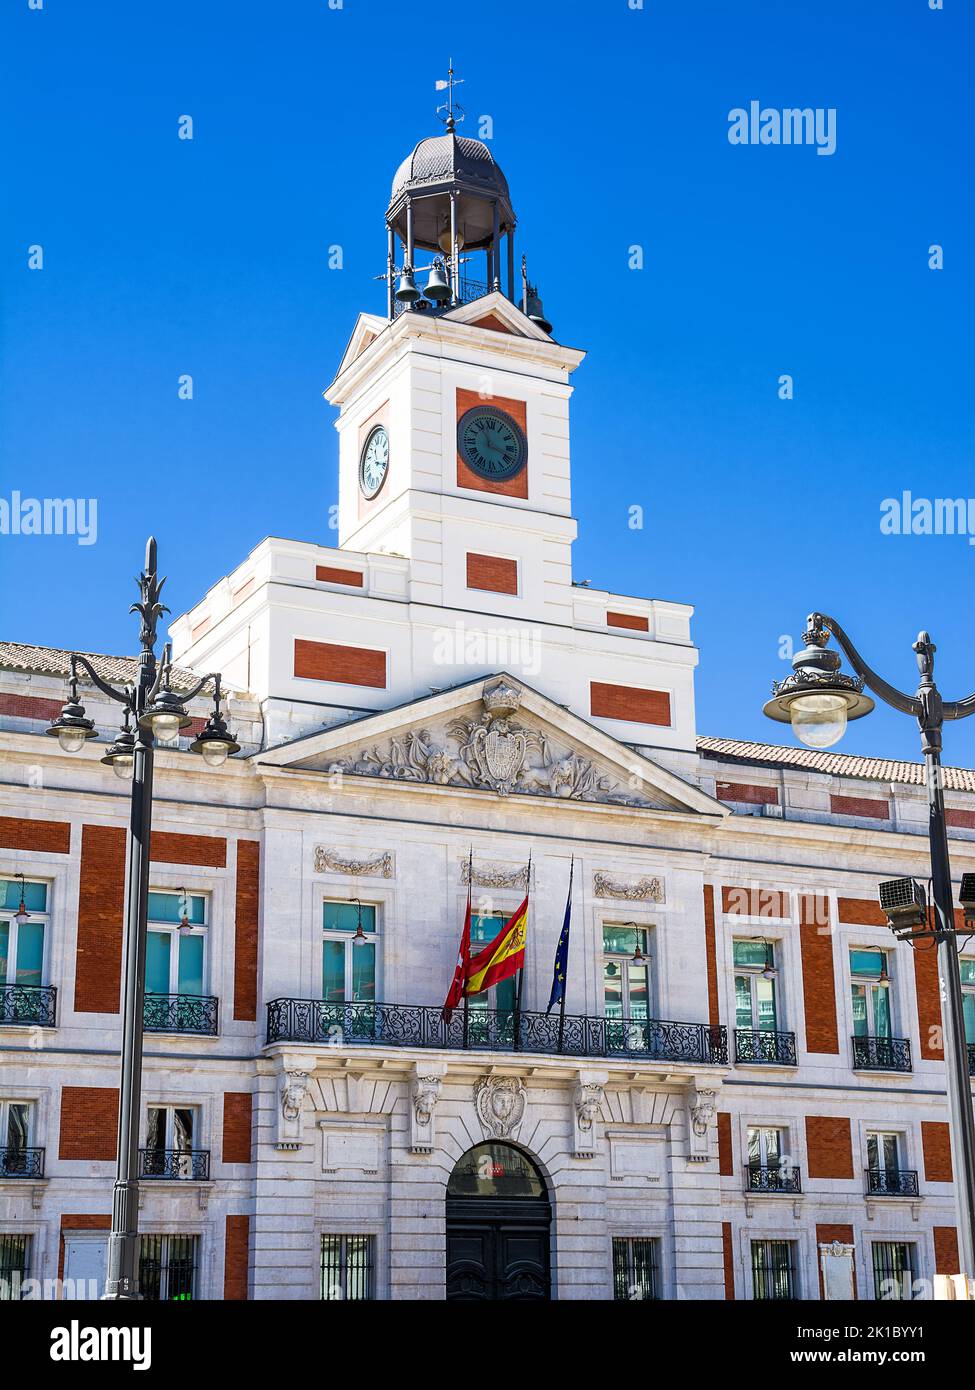 Facade of the Post Office Royale building in the Sol square in Madrid Stock Photo